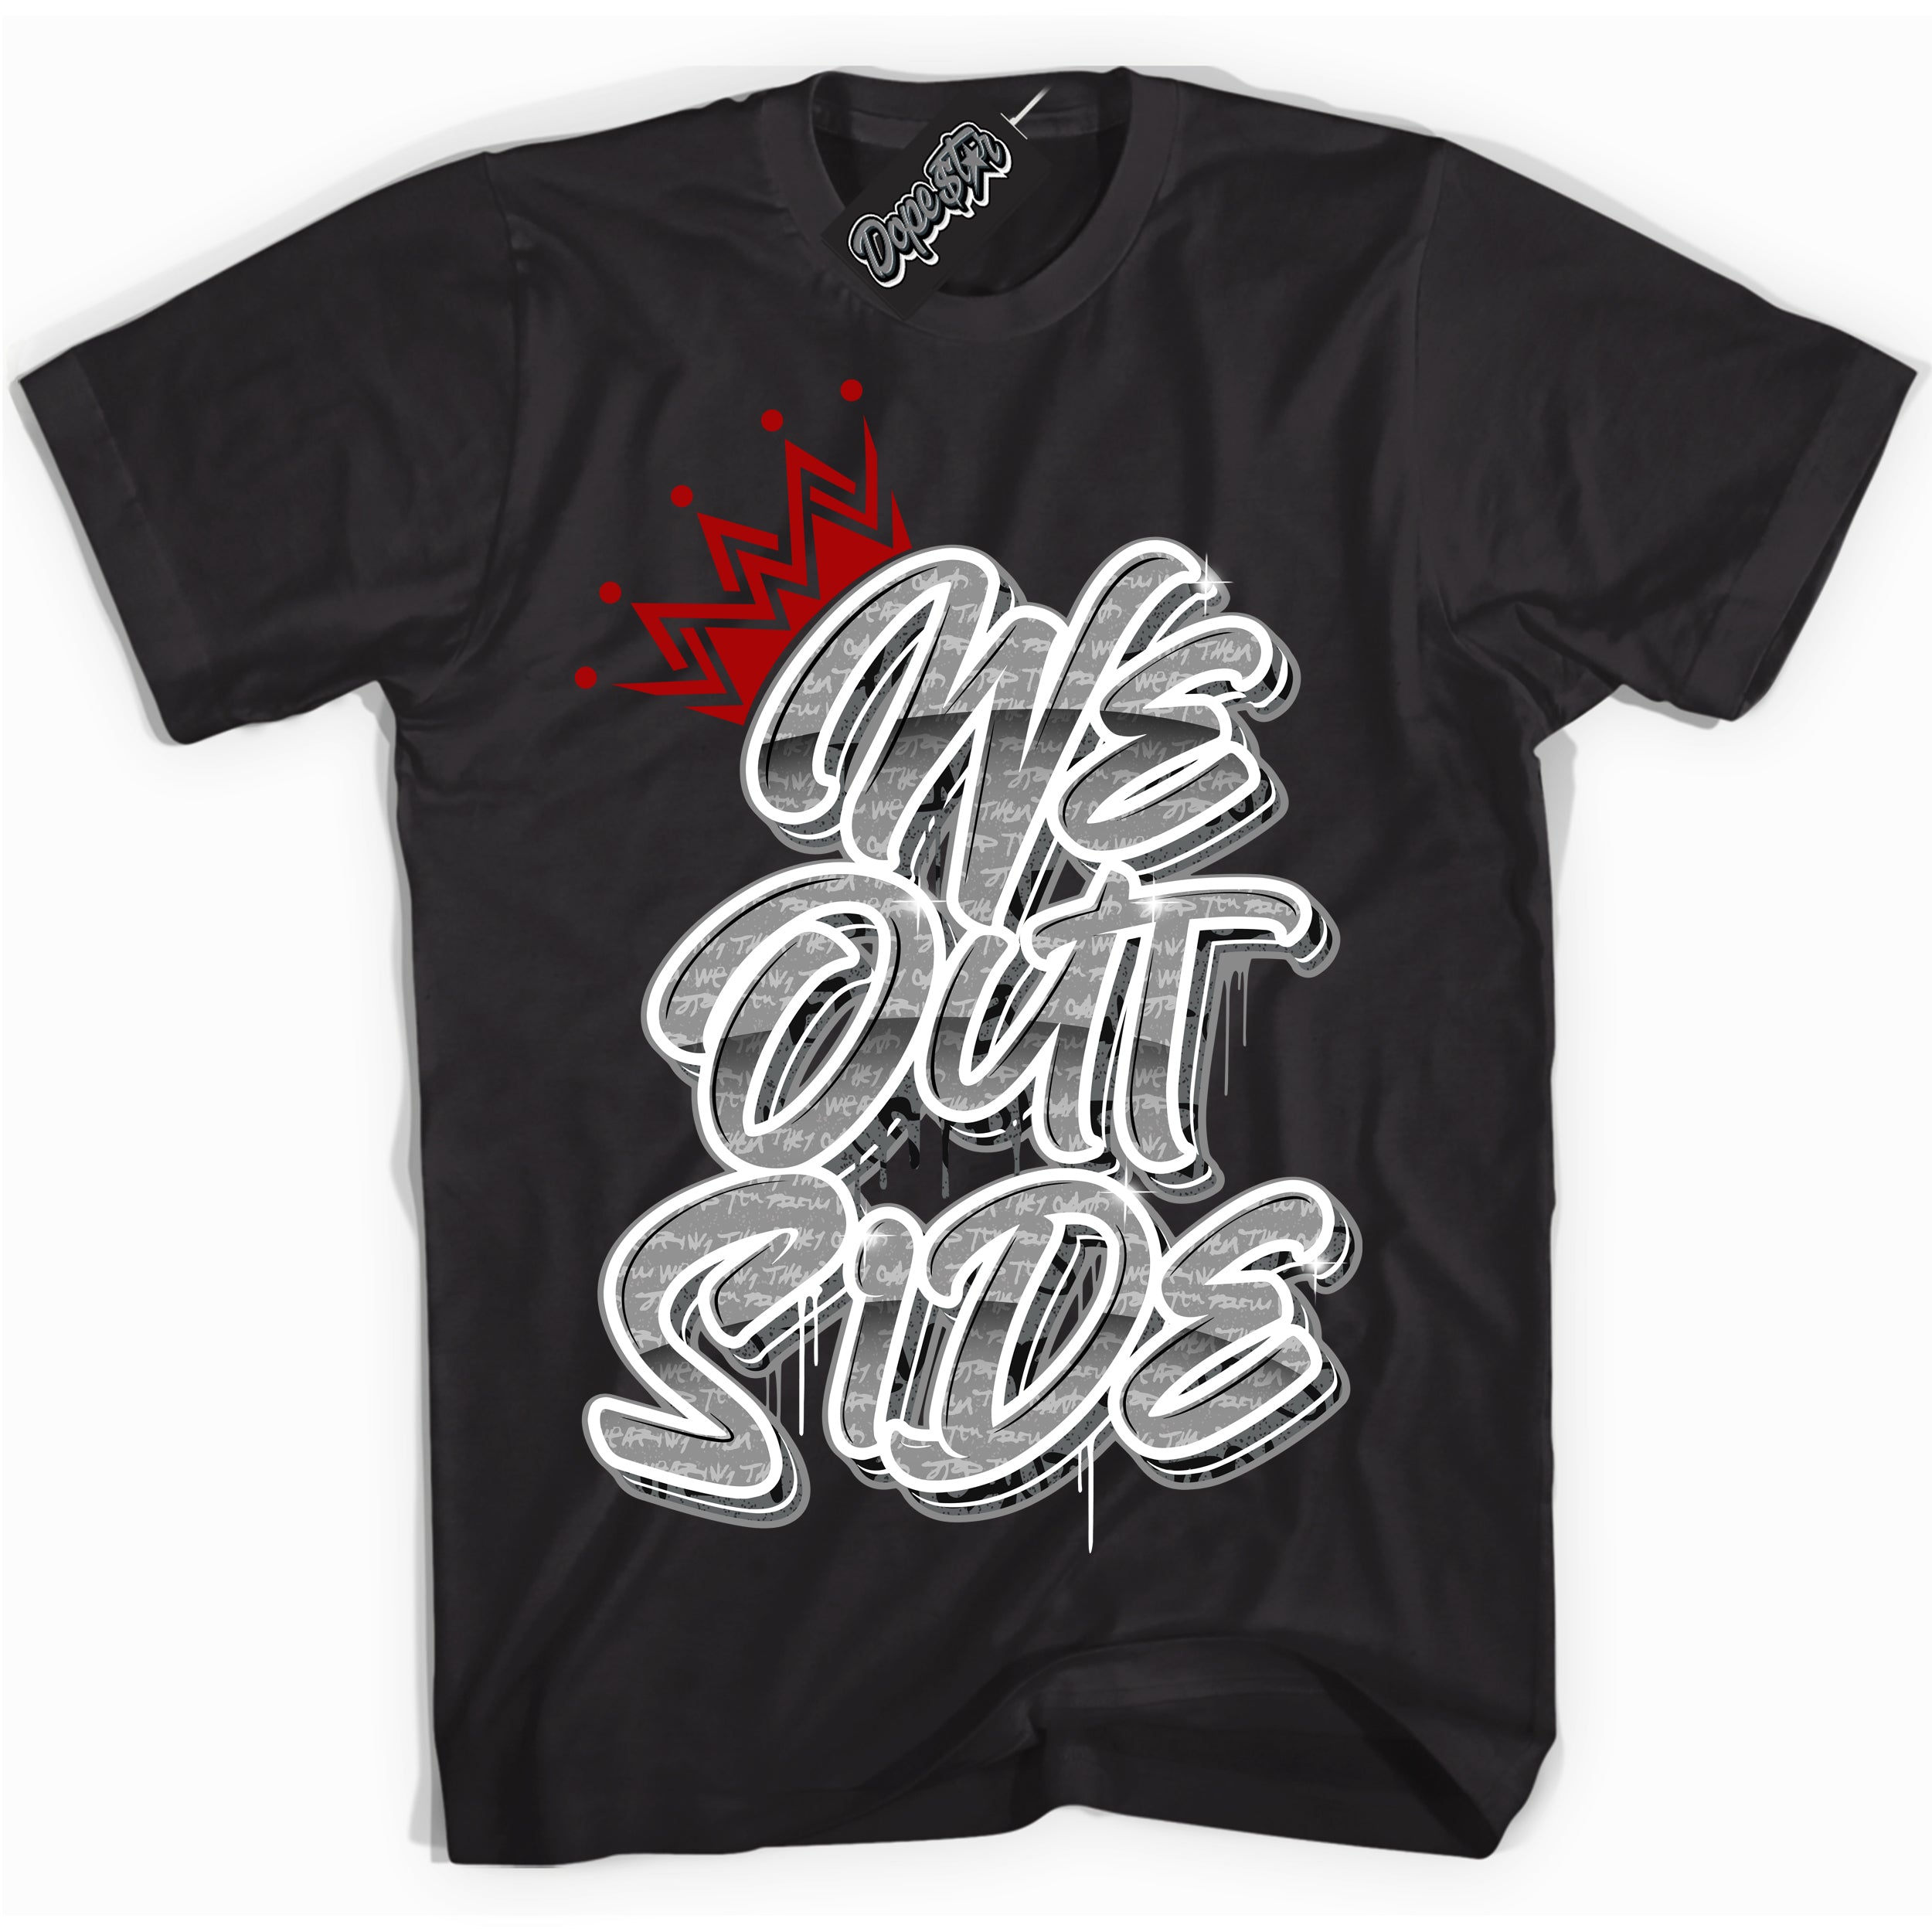 Cool Black Shirt with “ We Outside ” design that perfectly matches Rebellionaire 1s Sneakers.